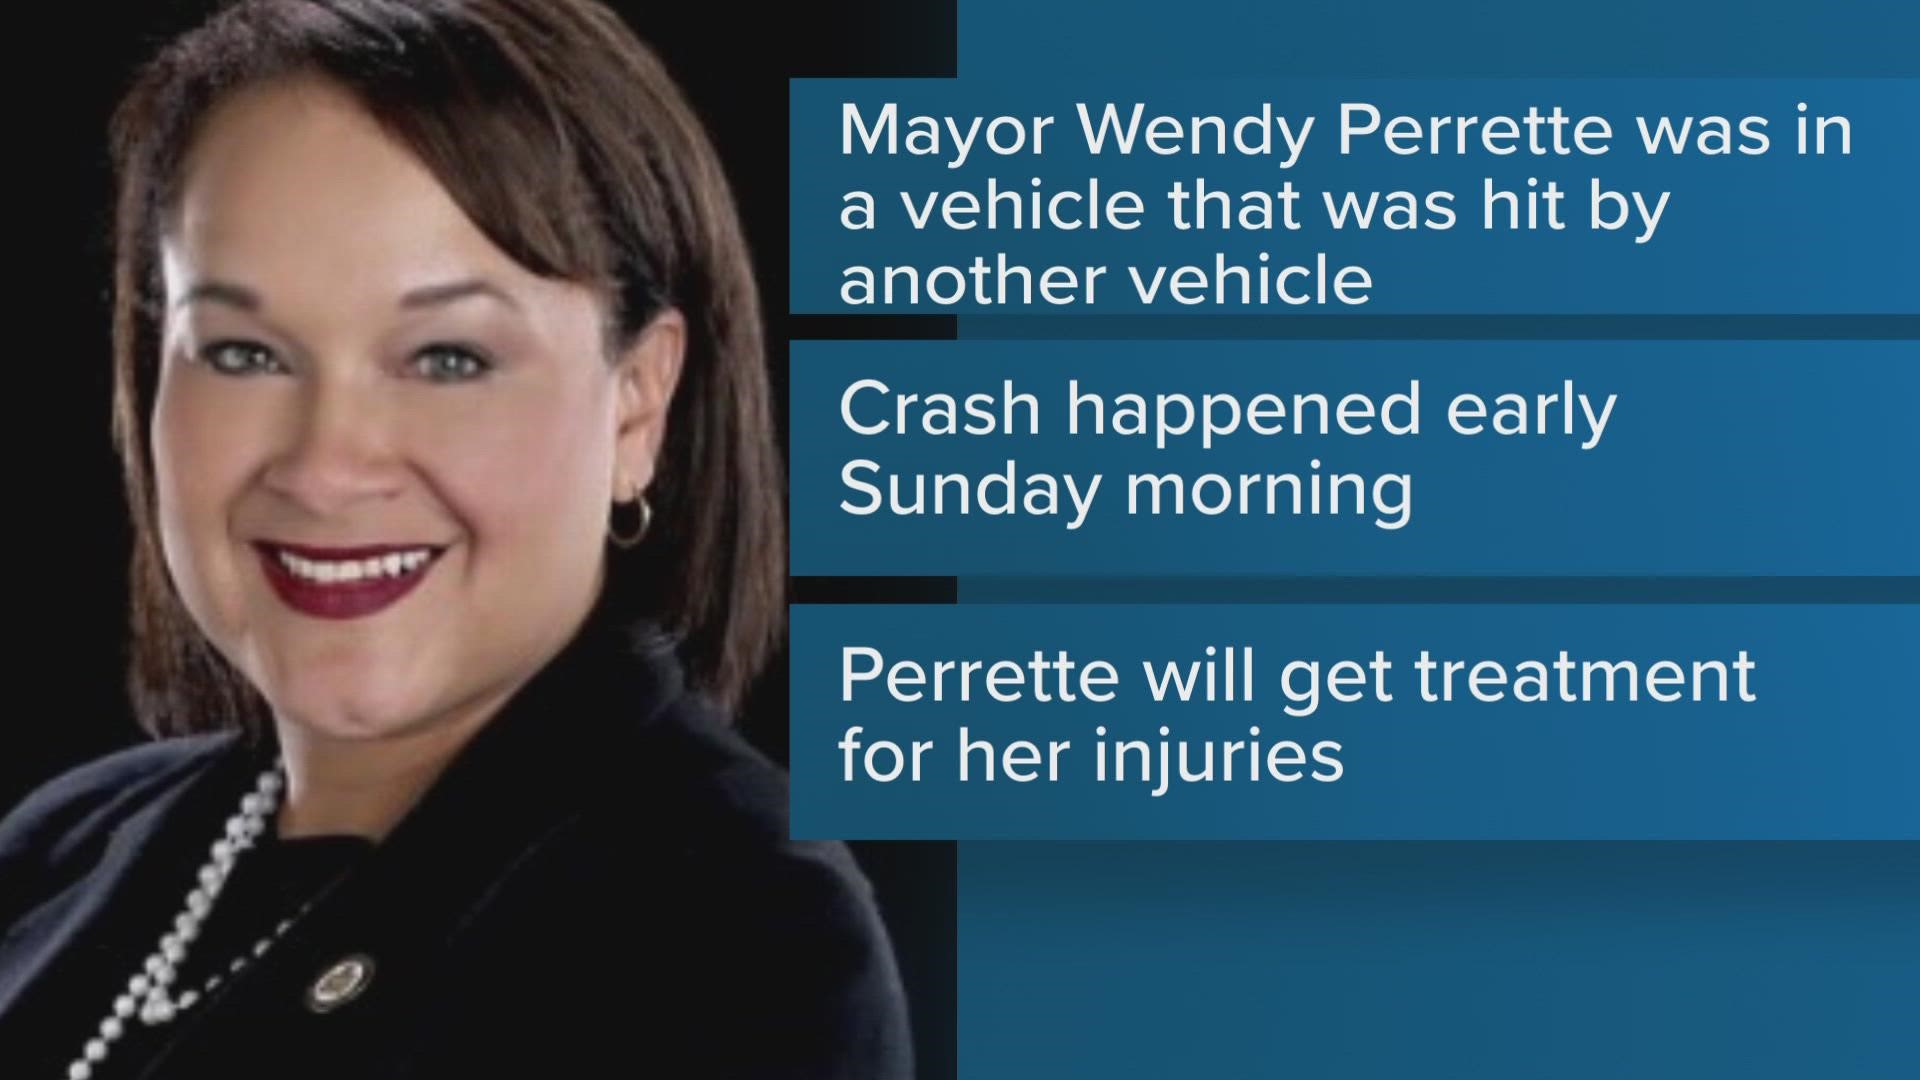 Wendy Perrette is expected to be back at work on Tuesday after she was injured in a car crash over the weekend.